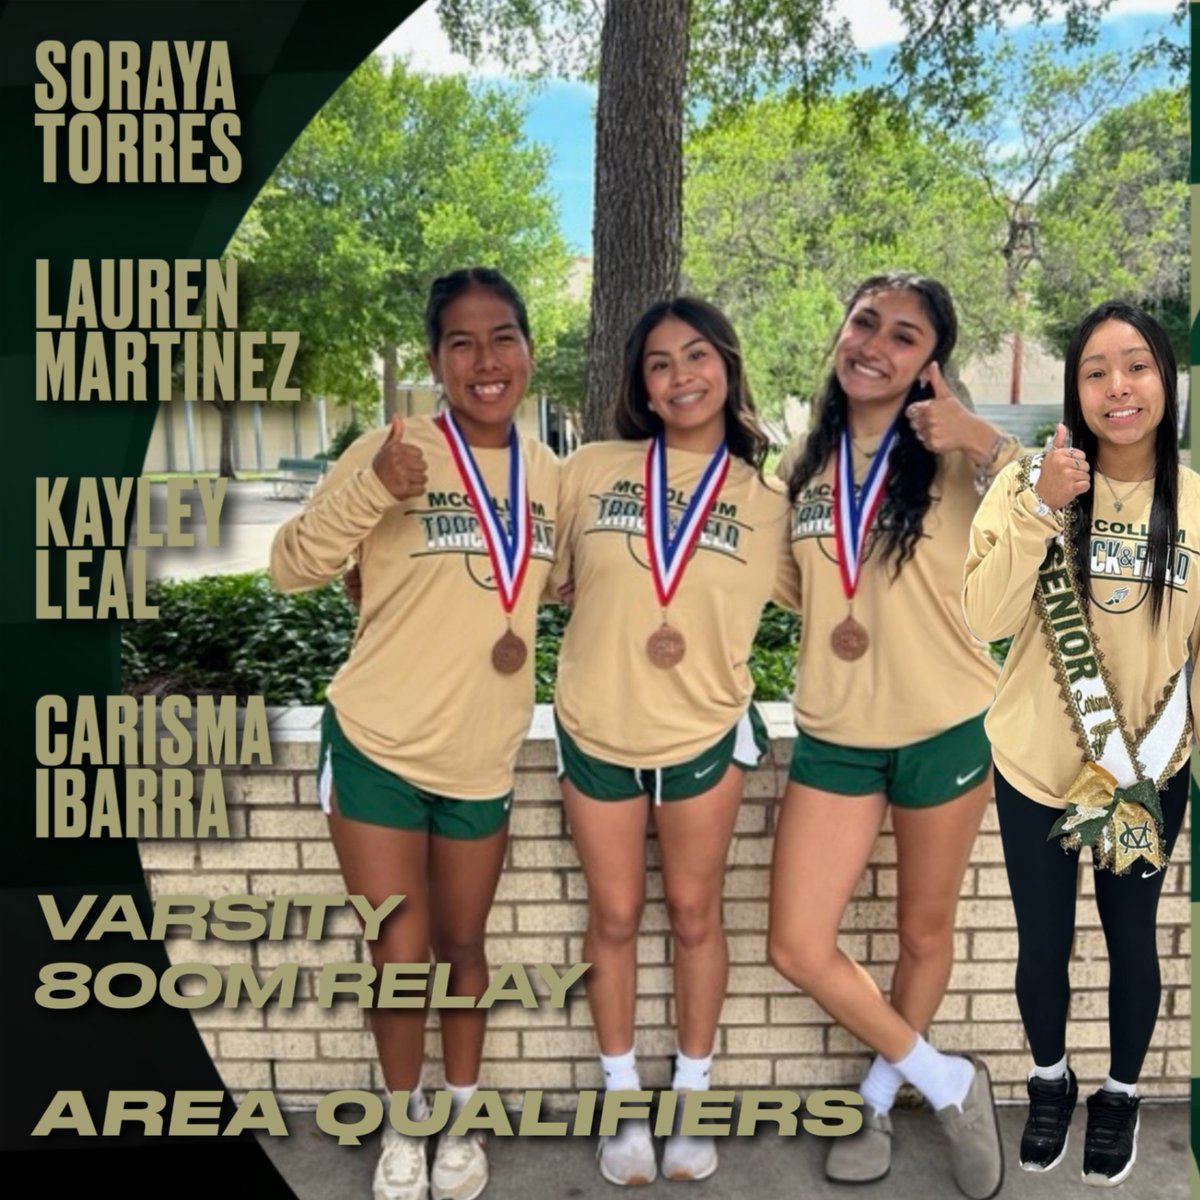 Congratulations to Soraya Torres, Lauren Martinez, Kayley Leal, and Carisma Ibarra for advancing to the Area Track Meet in the 800m relay!